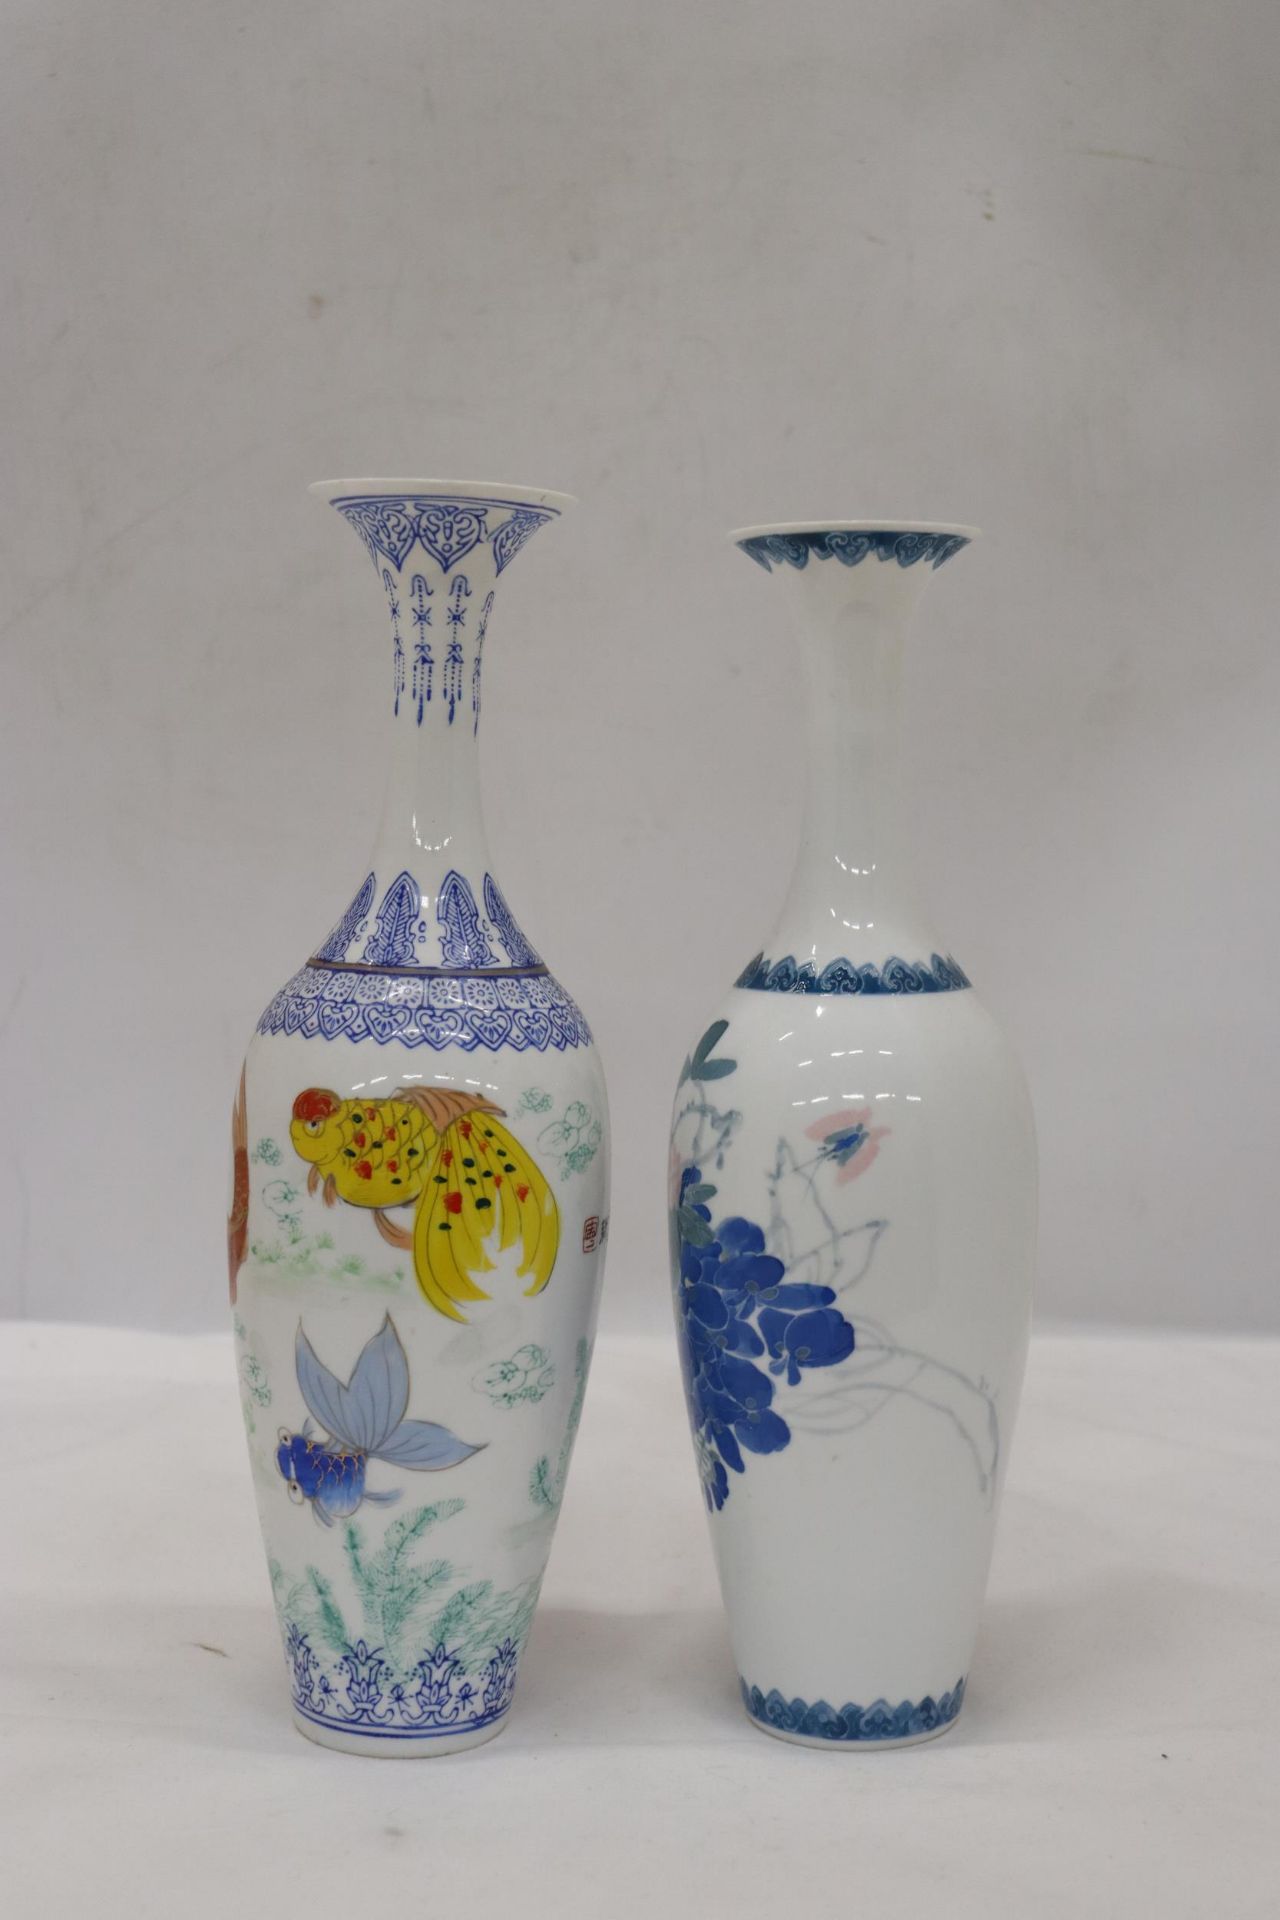 TWO VINTAGE CHINESE EGGSHELL HANDPAINTED VASES - KOI FISH AND FLORAL - Image 2 of 5